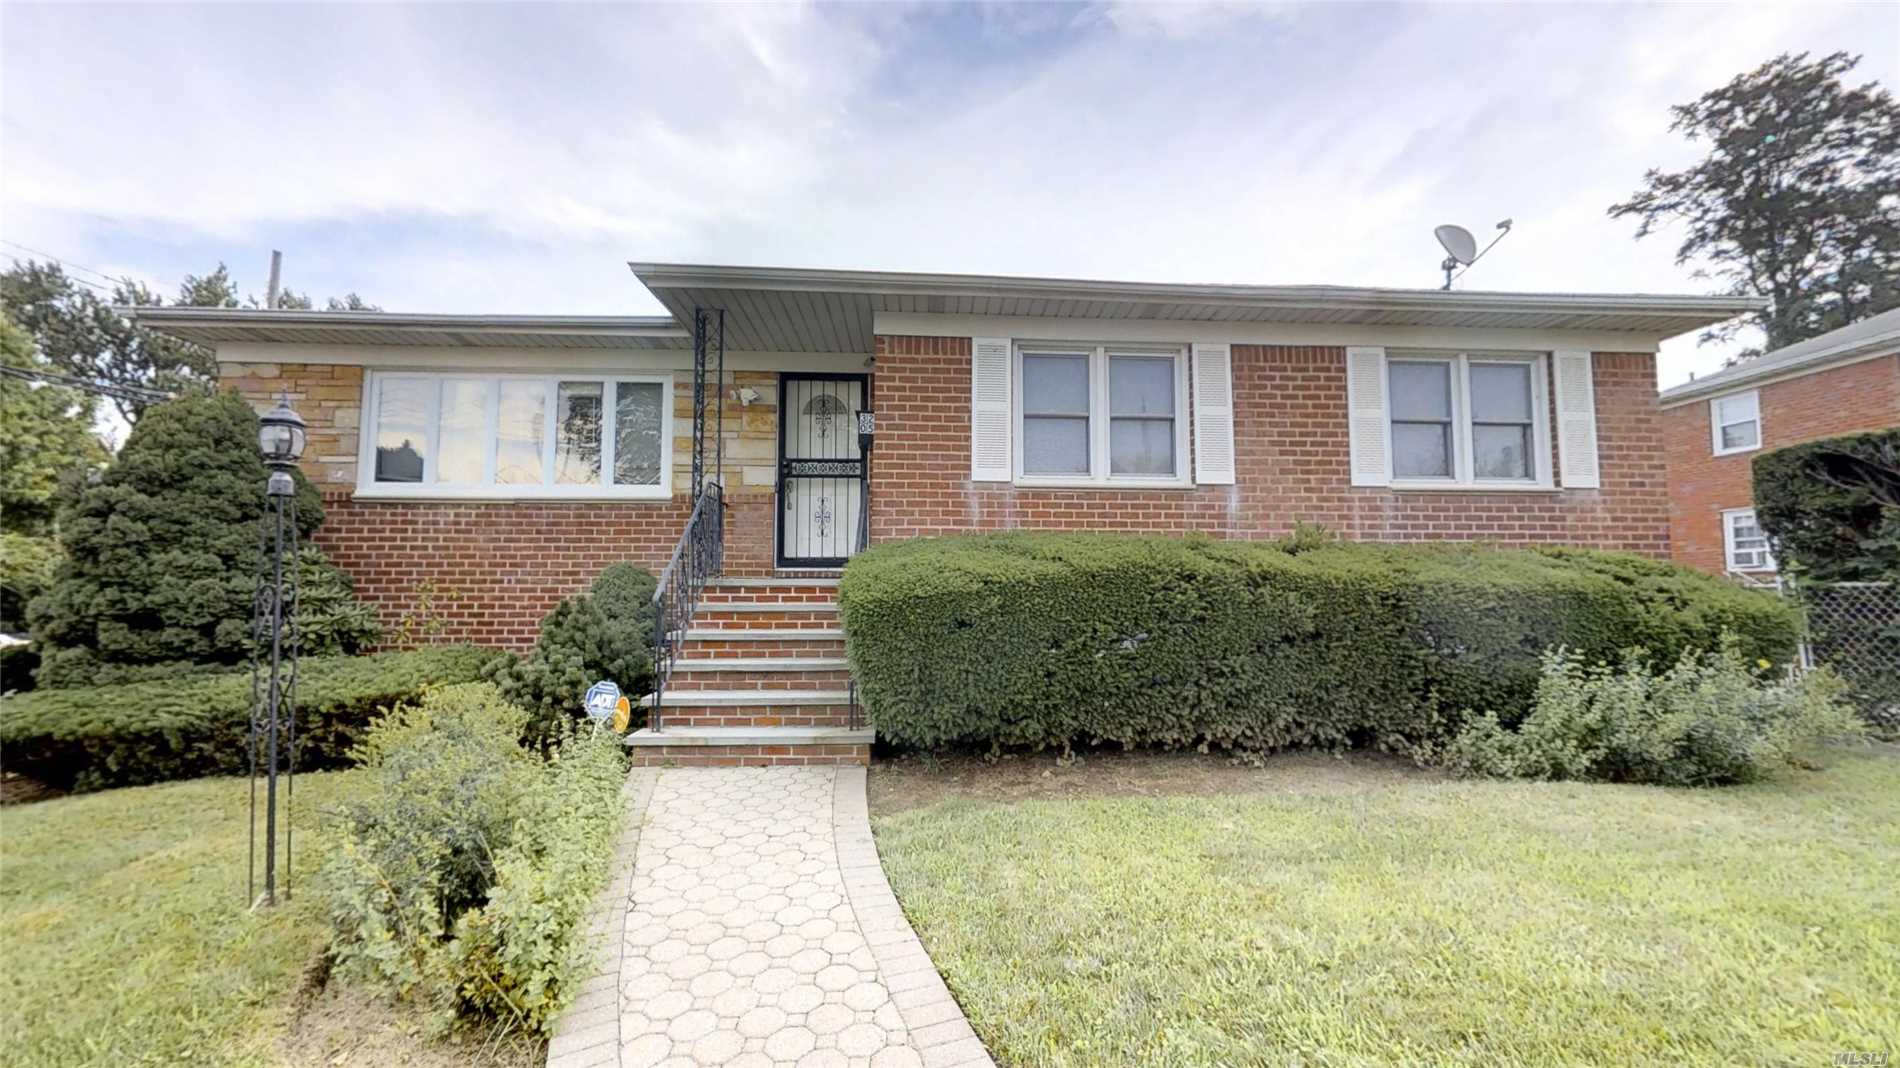 Newly Renovated Single Family Brick Home Located In Murray Hill - Flushing. Less Than One Block Away From Bowne Park. Conveniently 5 Mins Walk To Northern Blvd With Restaurants, Cafes, Supermarkets And Much More. Close To All Transportations (Buses/Q13, Q15, Q15A, Q28, Q16, Flushing-Palisades Park Shuttle Bus) & Lirr. Young Brick Exterior With First Floor Offering Three Bedrooms And Two Full Baths, Hardwood Floors With Advanced Technology Kitchen Appliances And Two Car Garage